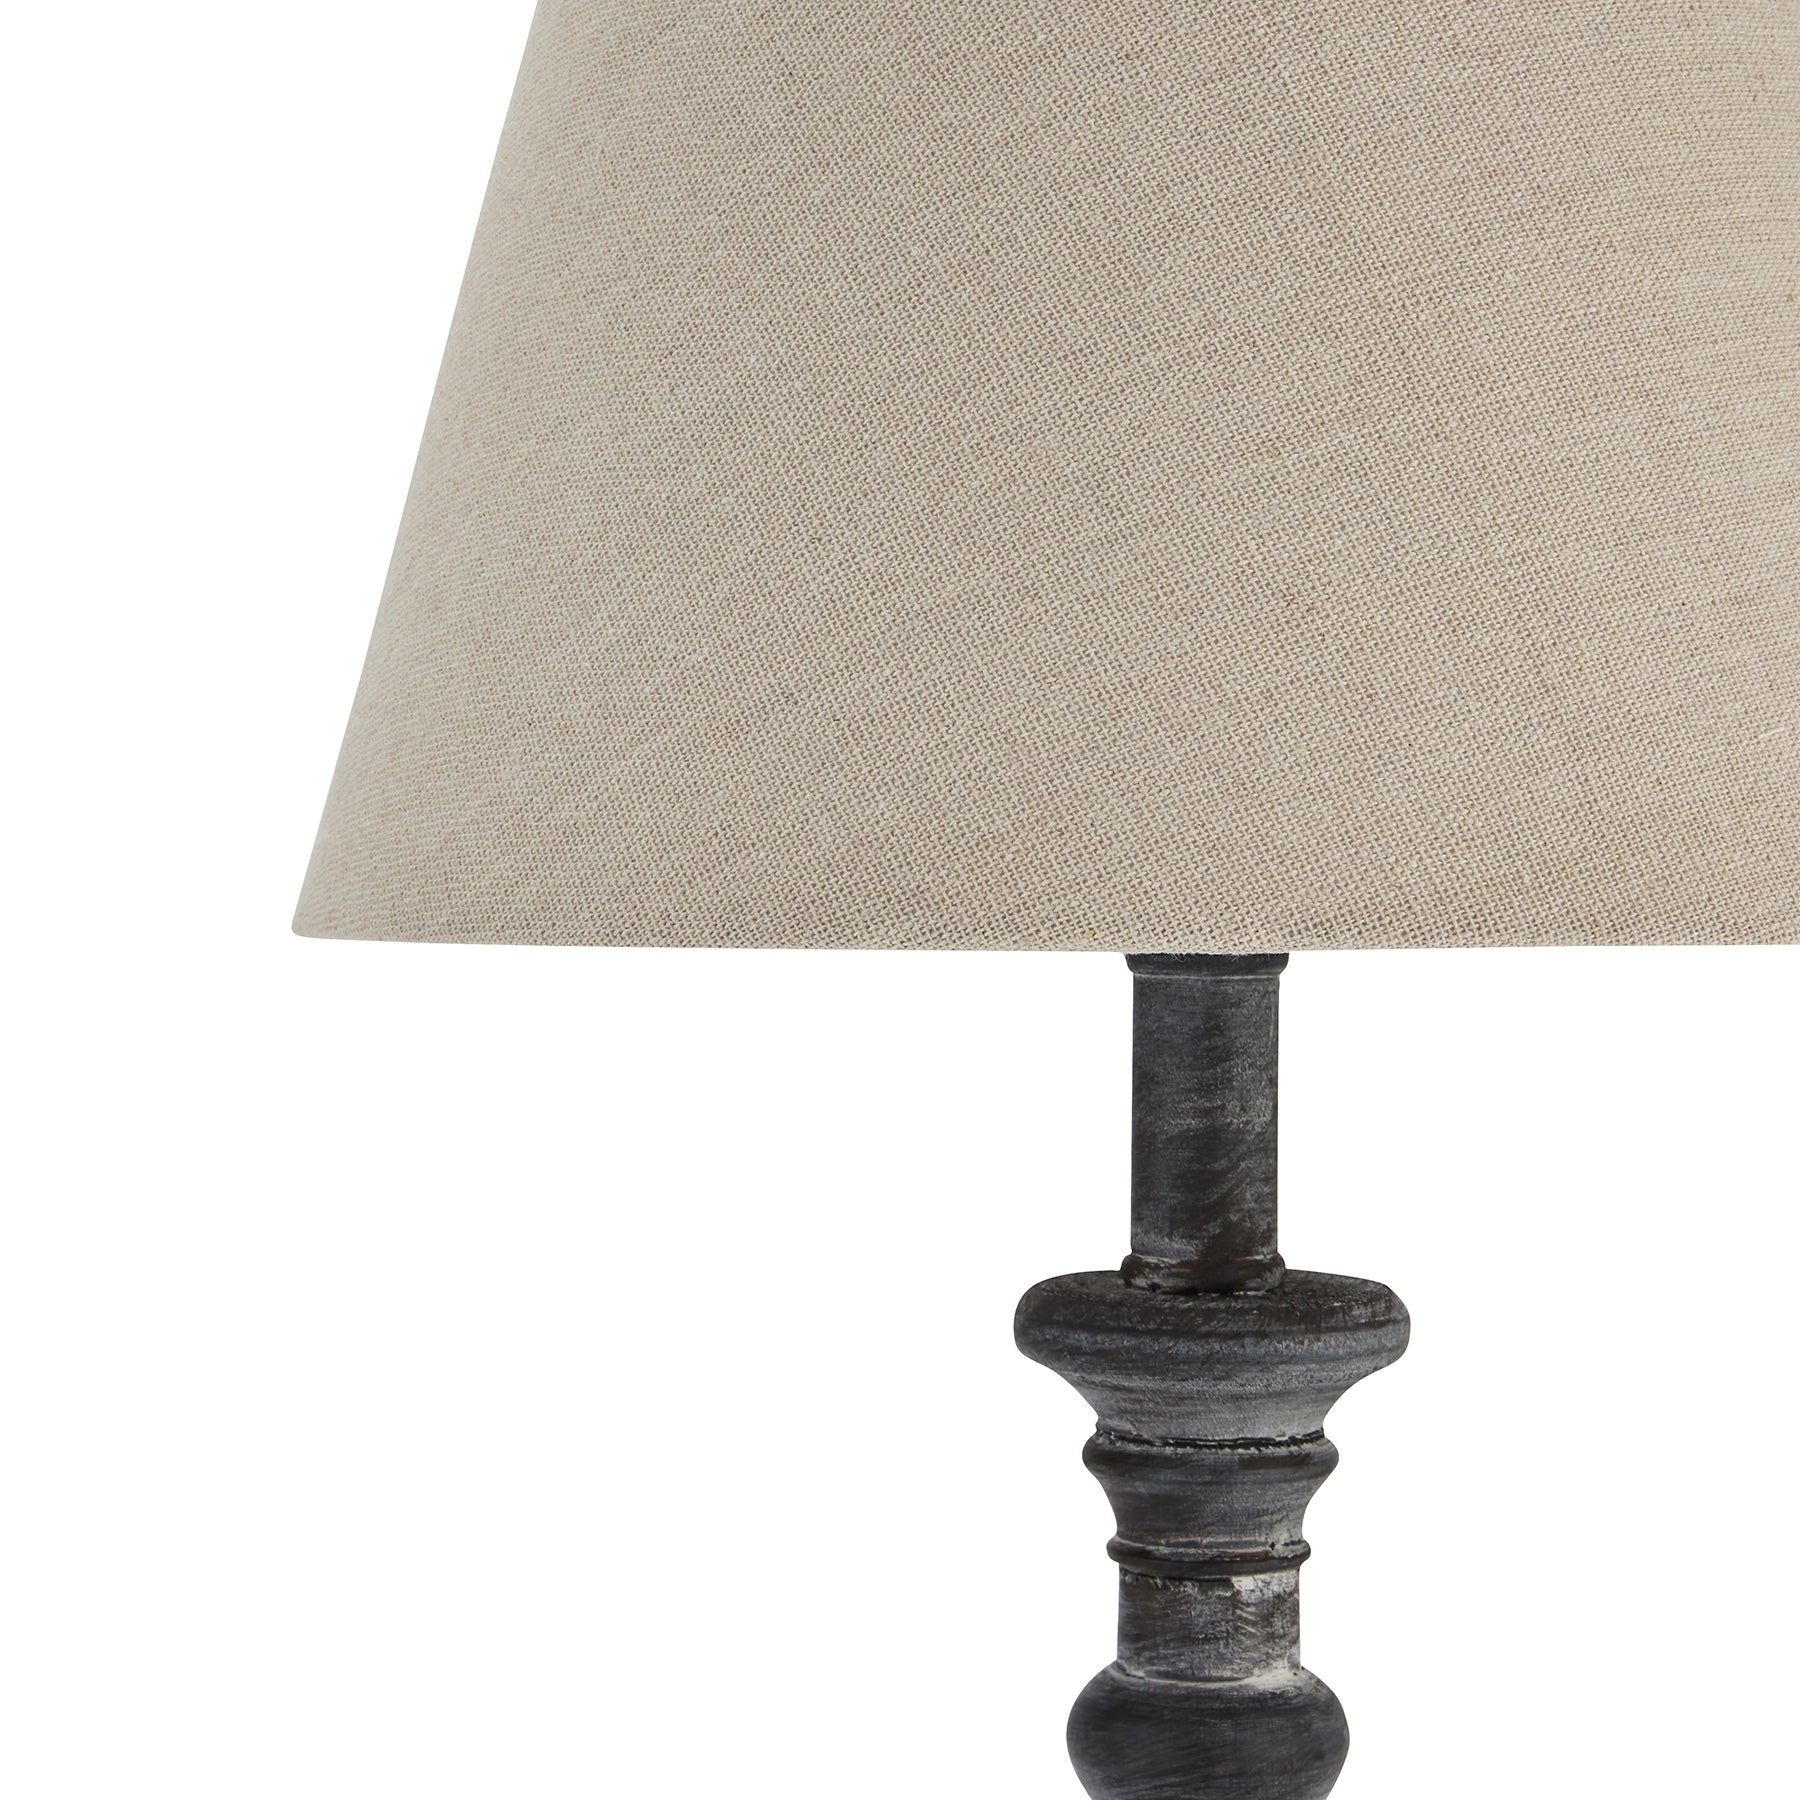 Botero Column Table Lamp, Grey Washed Wood & Linen